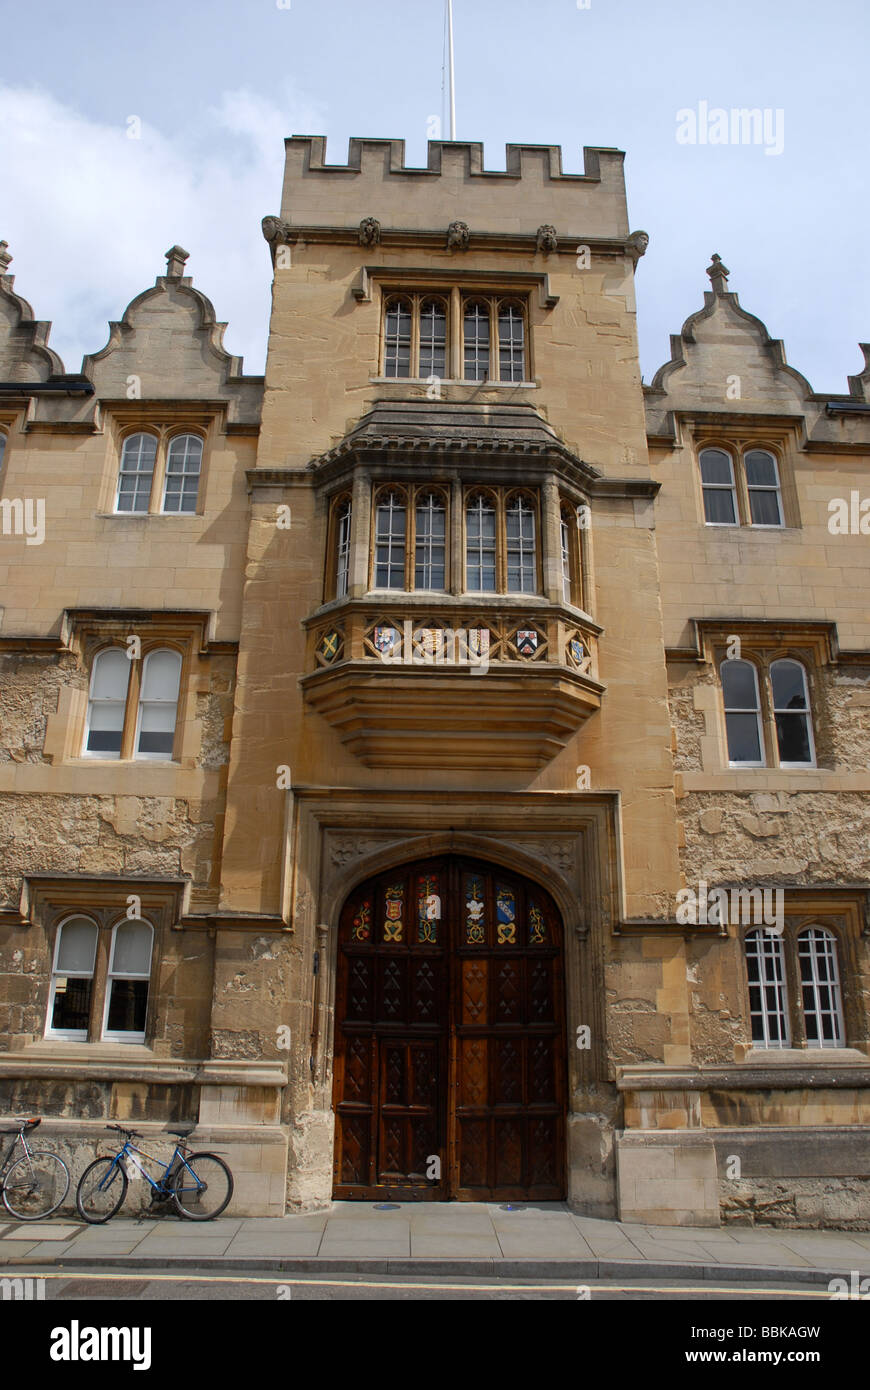 facade and main entrance to Oriel College, University of Oxford, Oxford, Oxofordshire, England Stock Photo